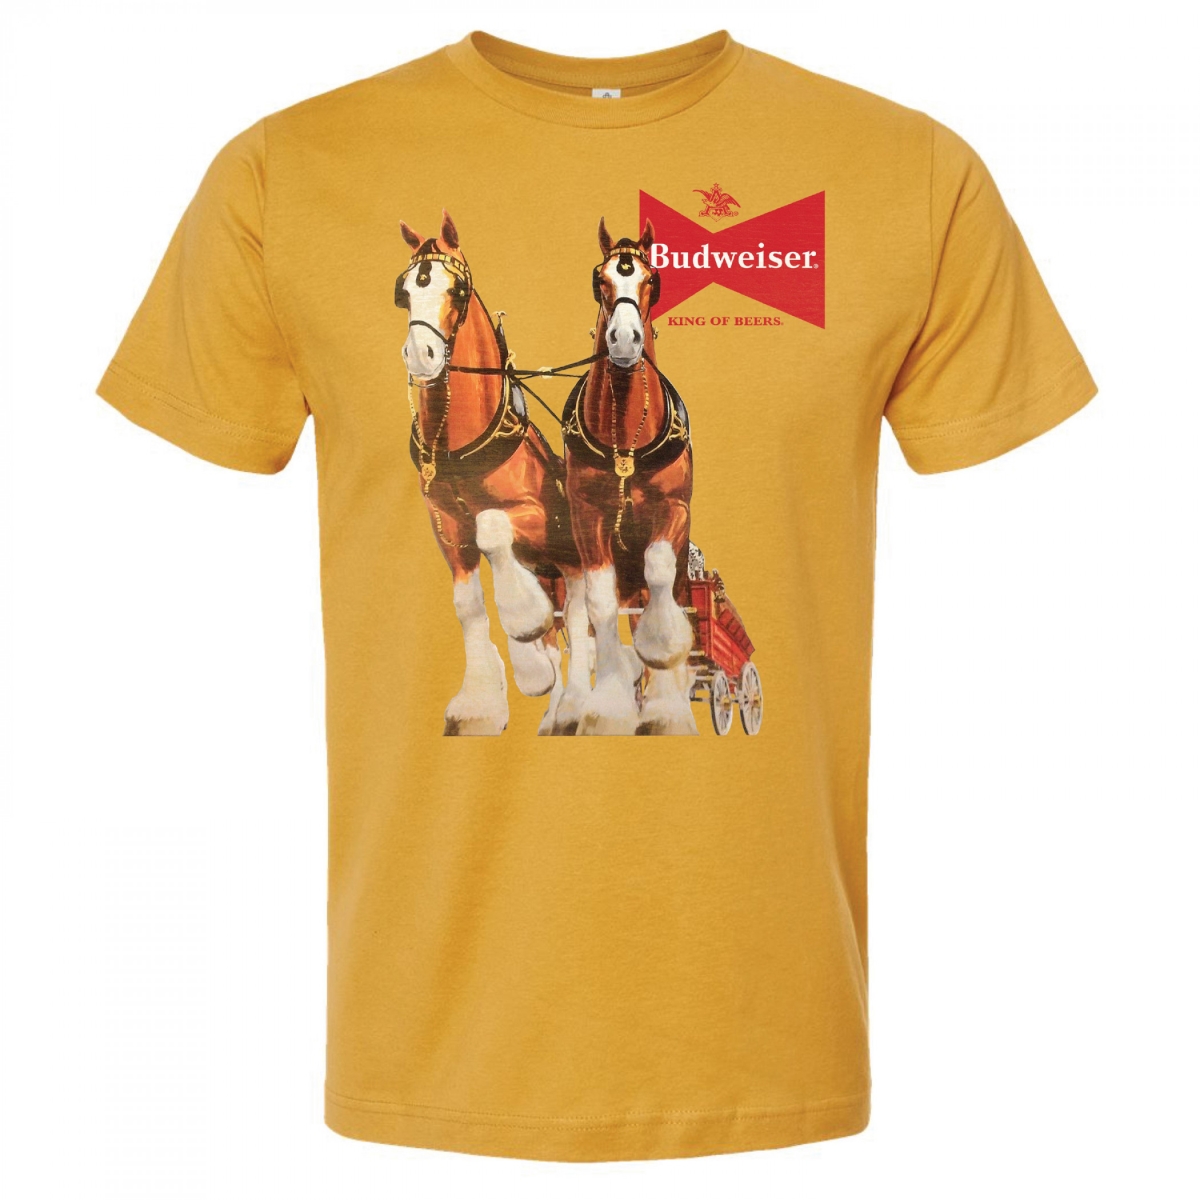 863880-large  Clydesdales Gold Colorway Cotton T-Shirt, Gold - Large -  Budweiser